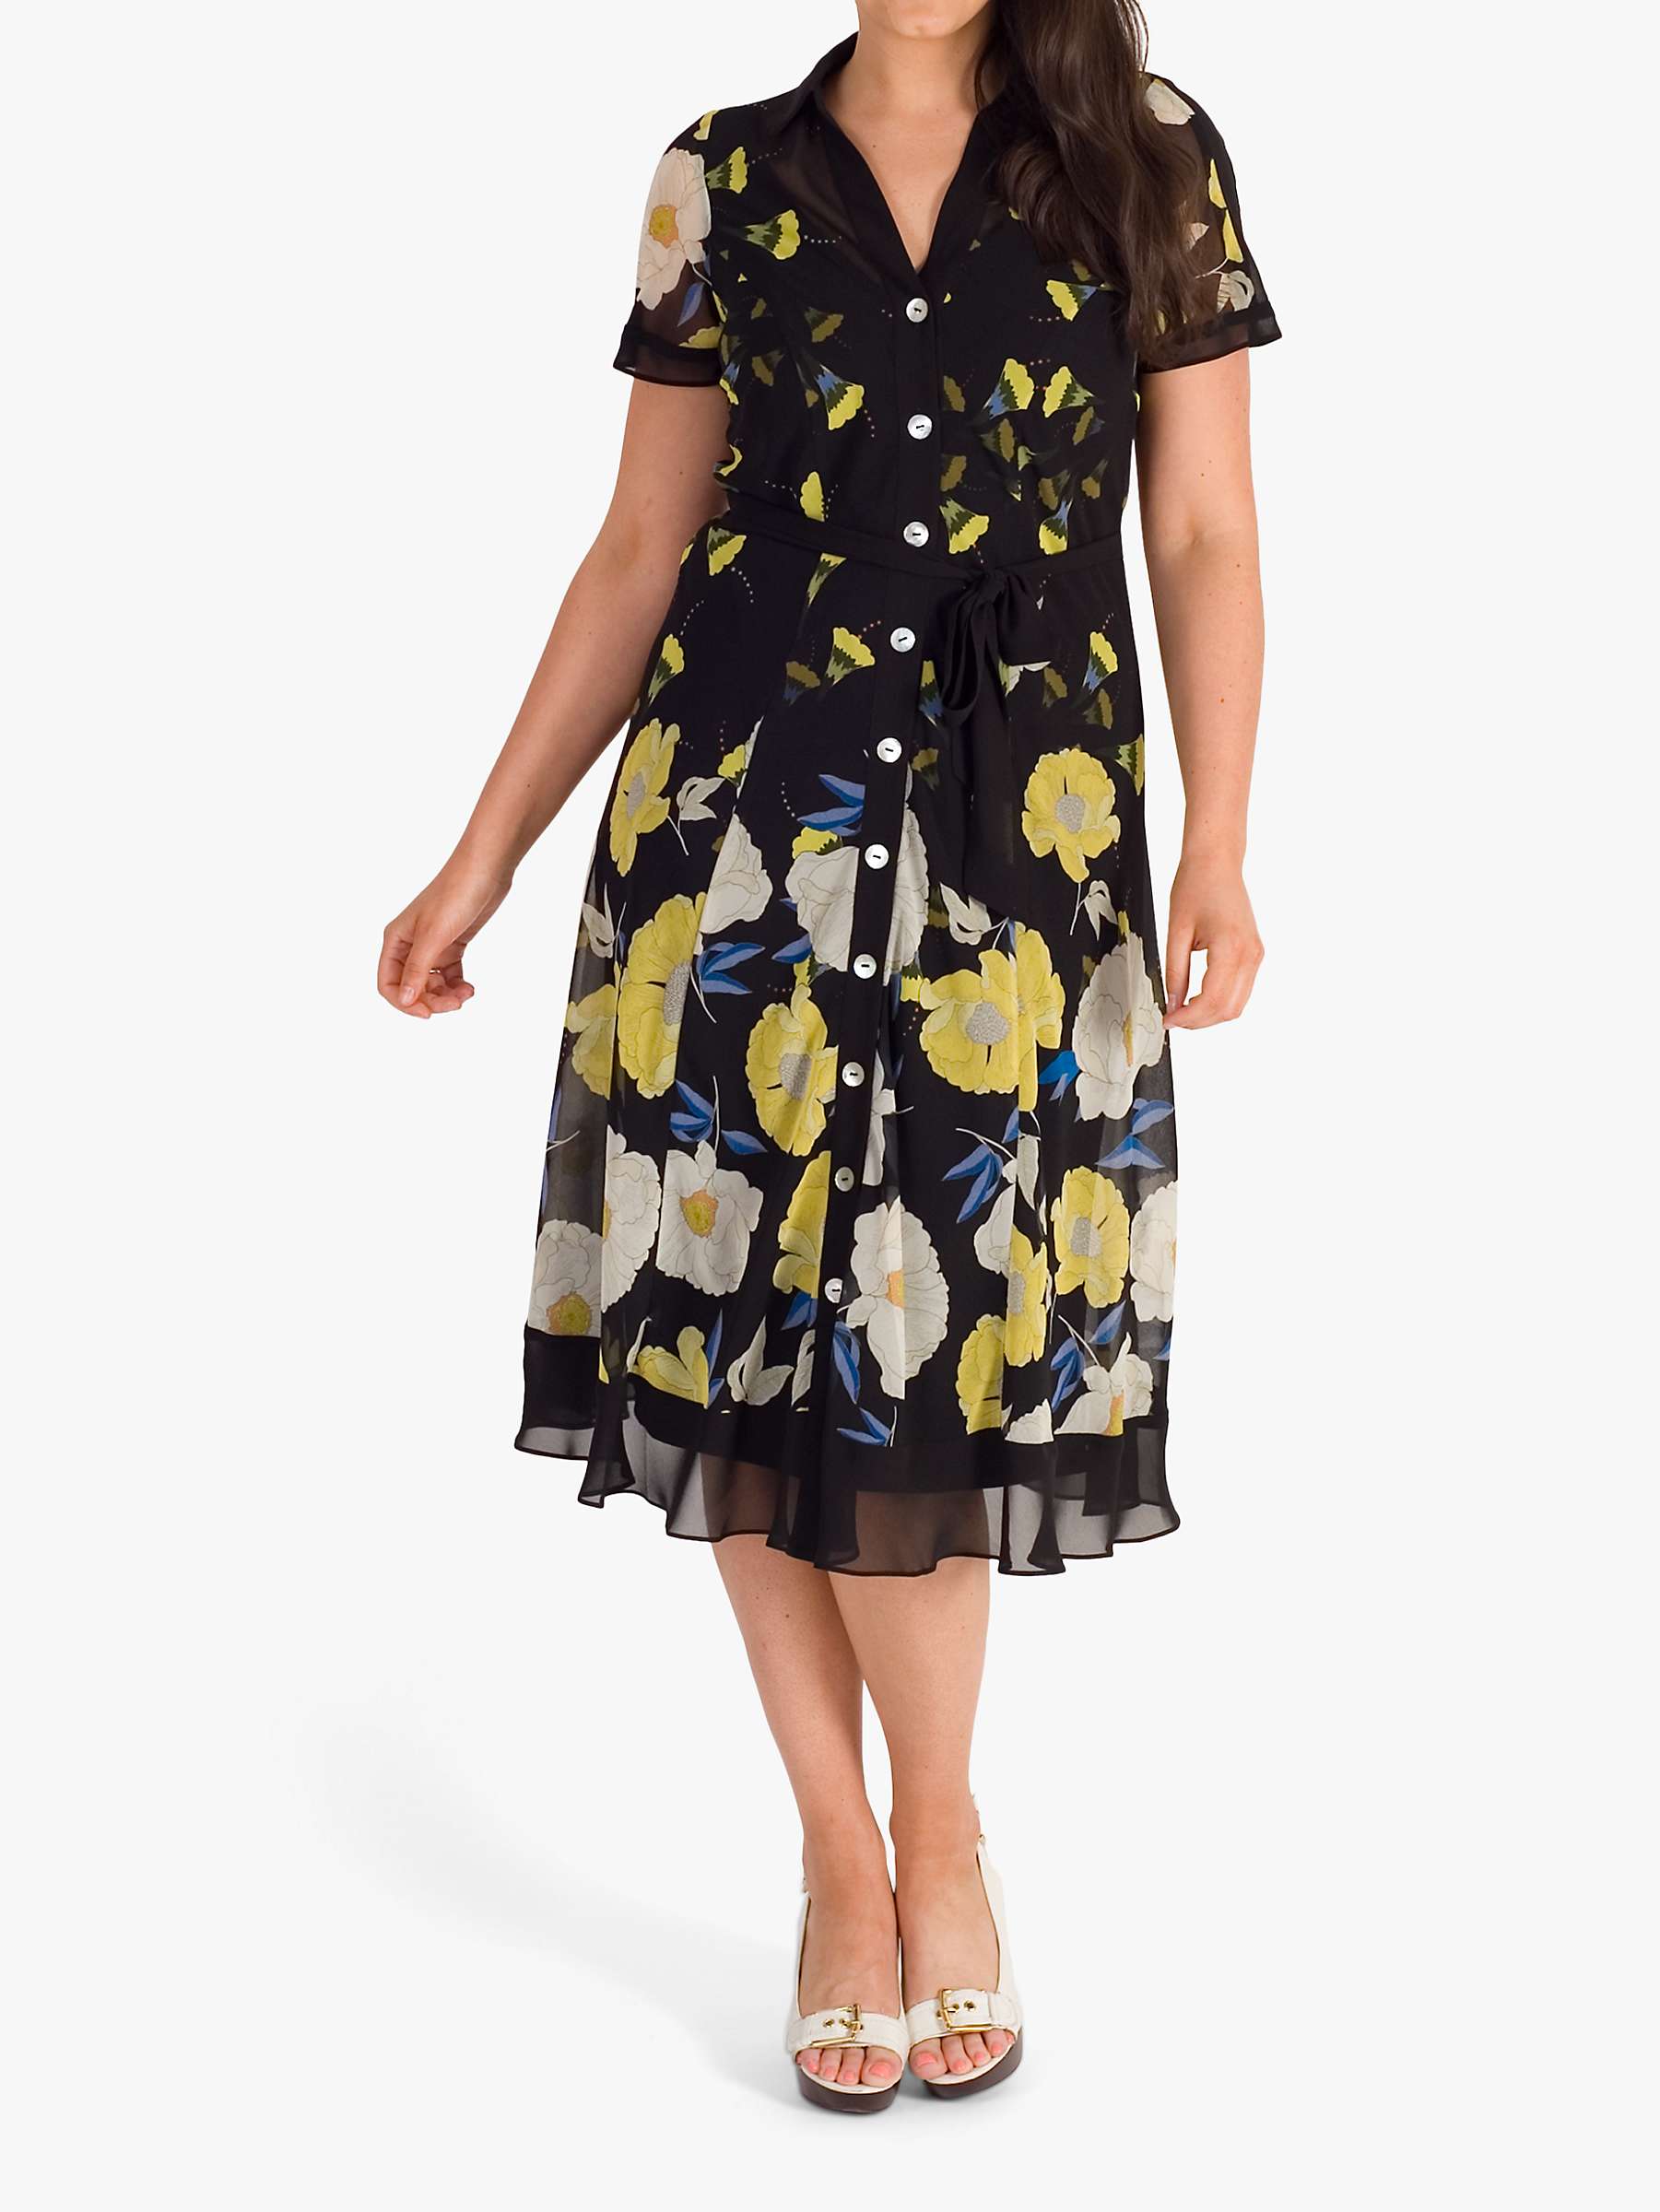 Buy chesca Floral Poppy Border Shirt Dress, Black/Yellow Online at johnlewis.com